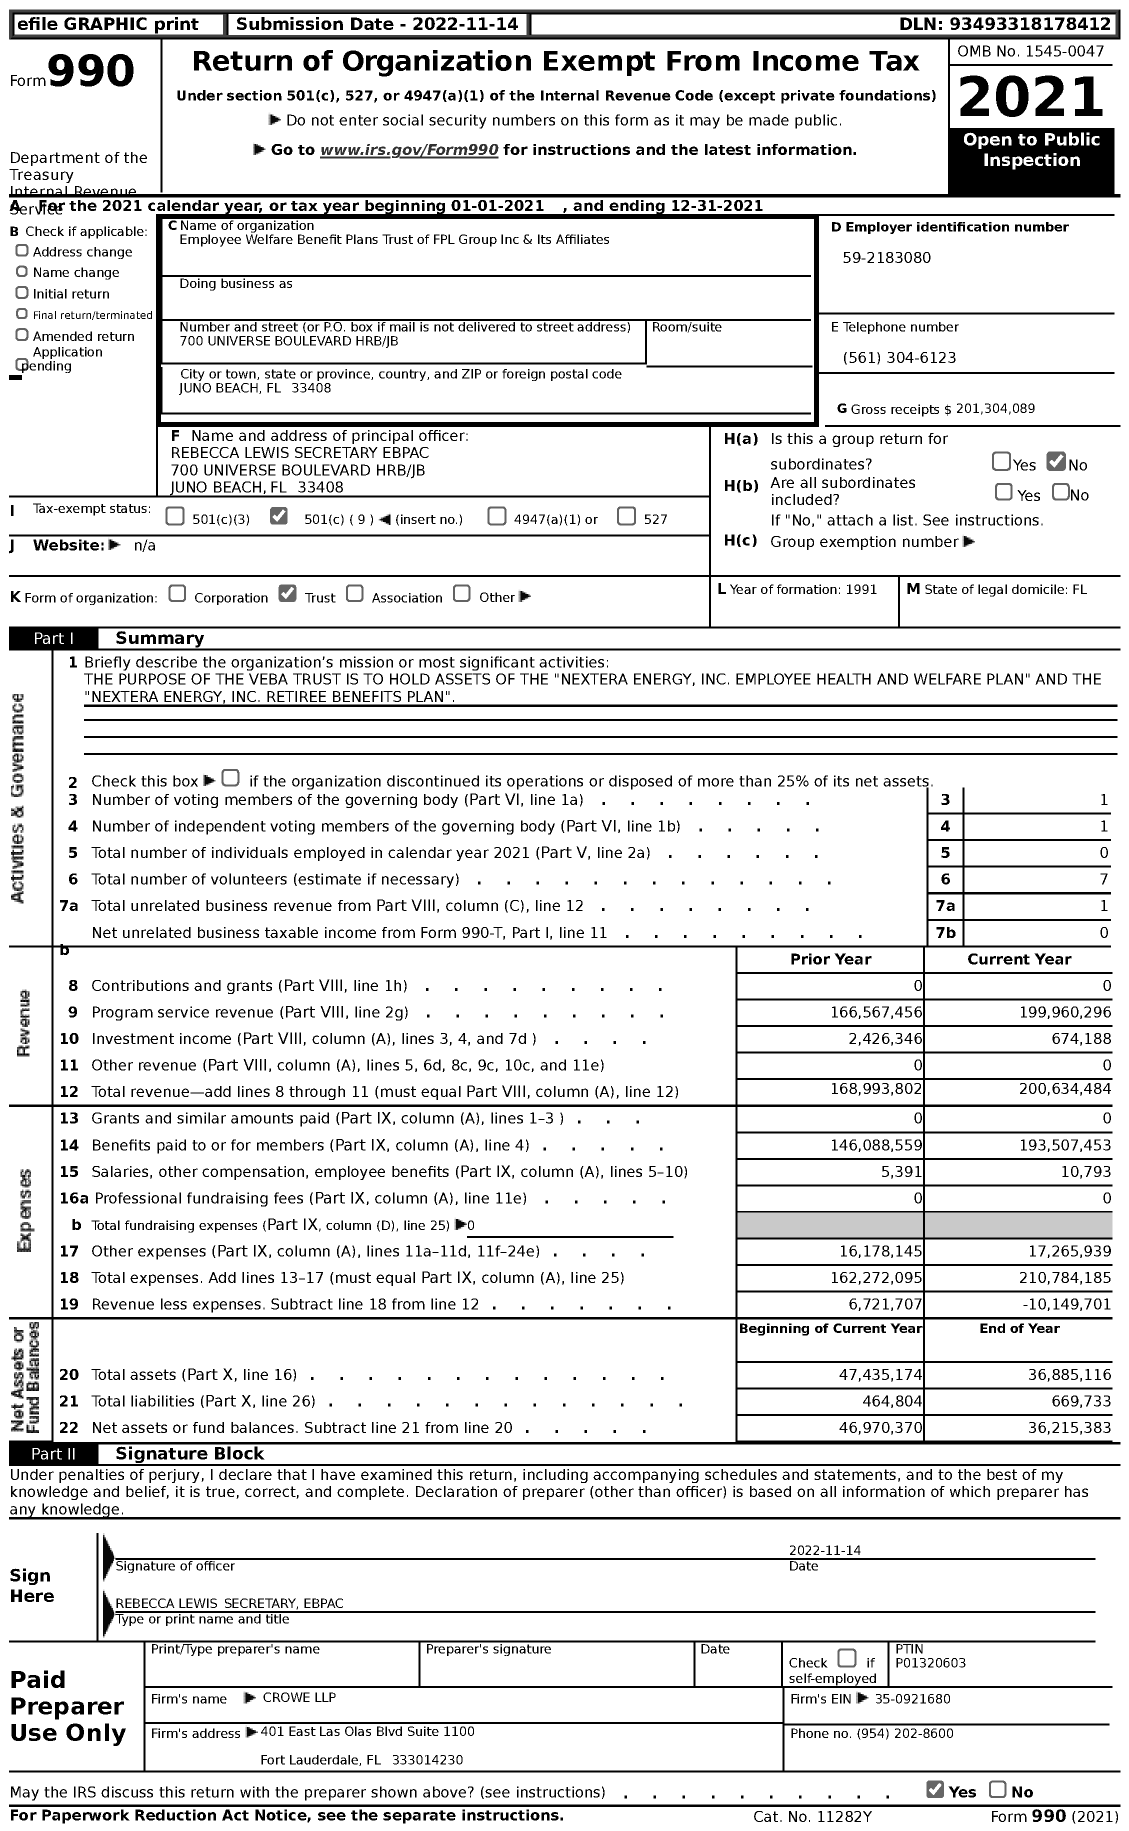 Image of first page of 2021 Form 990 for Employee Welfare Benefit Plans Trust of FPL Group Inc & Its Affiliates